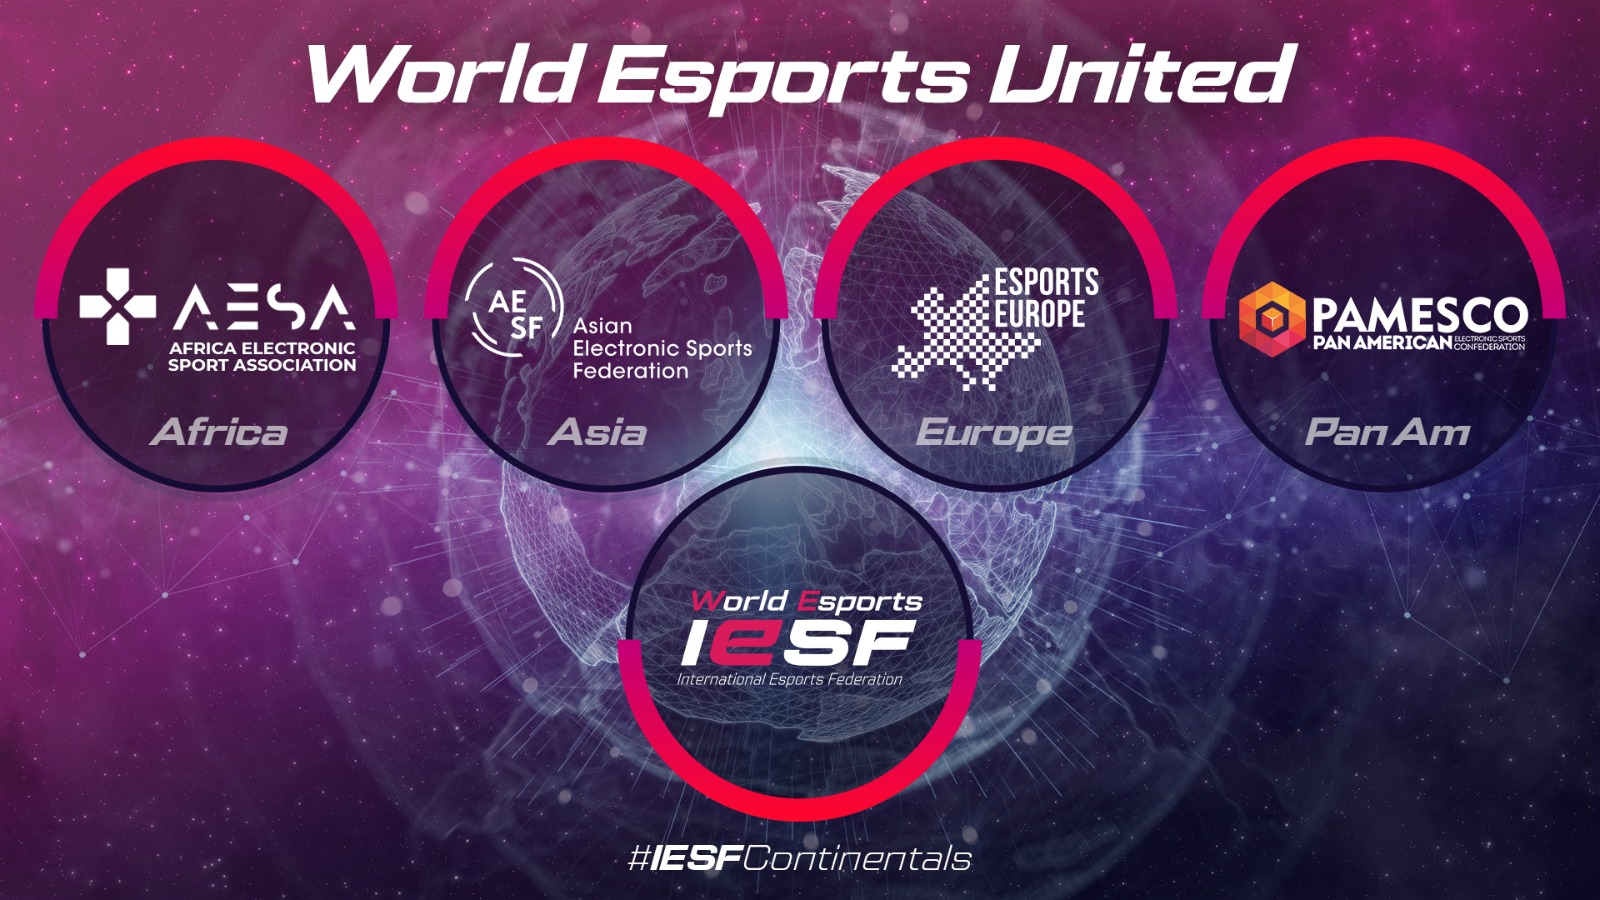 IESF CONTINUES TO UNITE THE WORLD OF ESPORTS WITH ACCEPTANCE OF THREE NEW CONTINENTAL FEDERATIONS